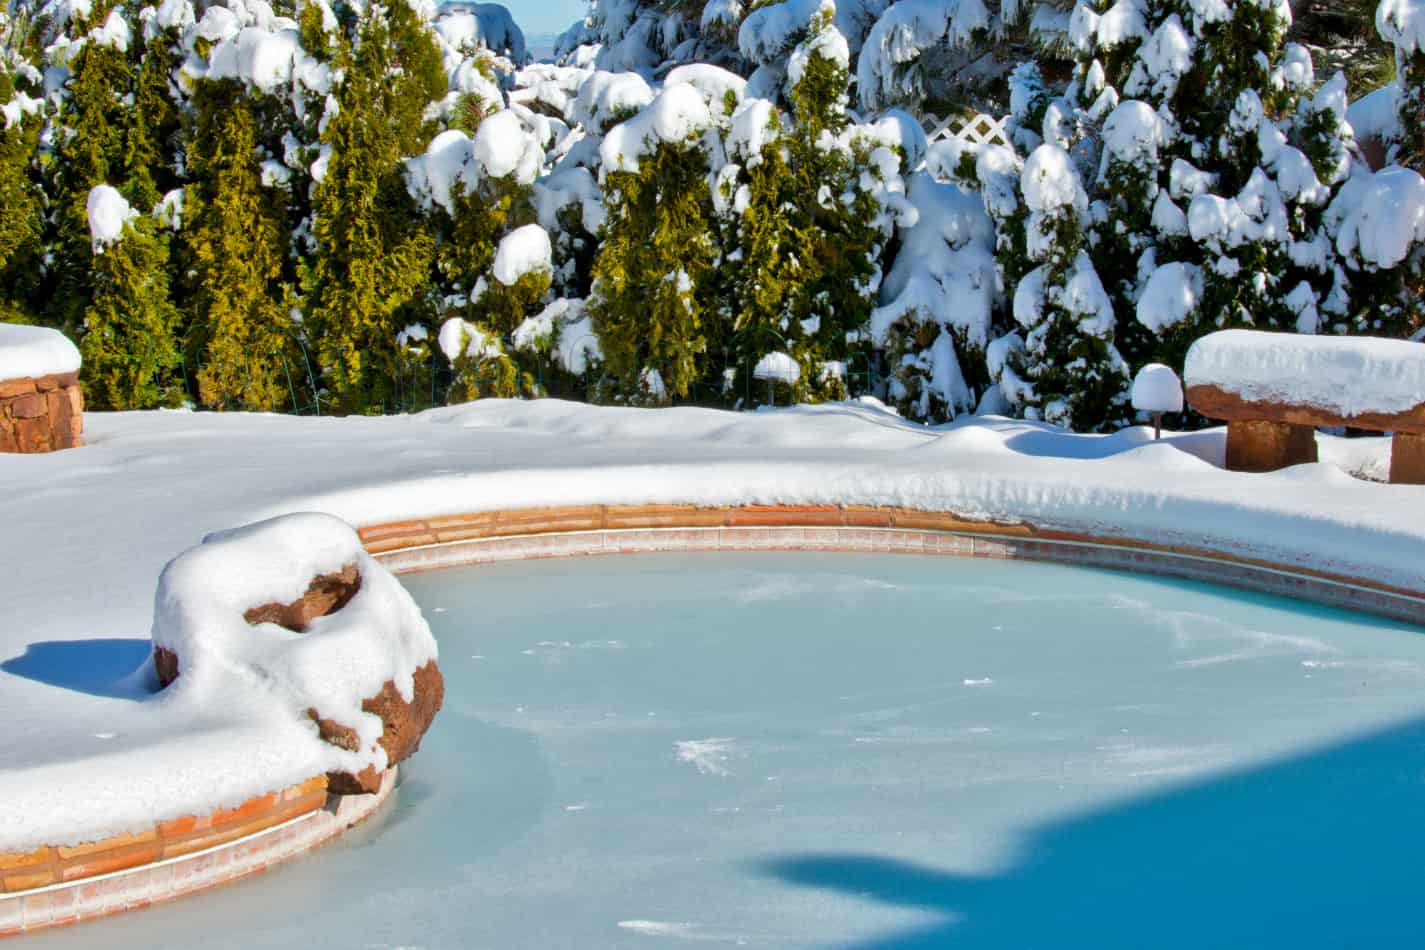 How to Winterize a Pool: Proper Prep for Cold Weather